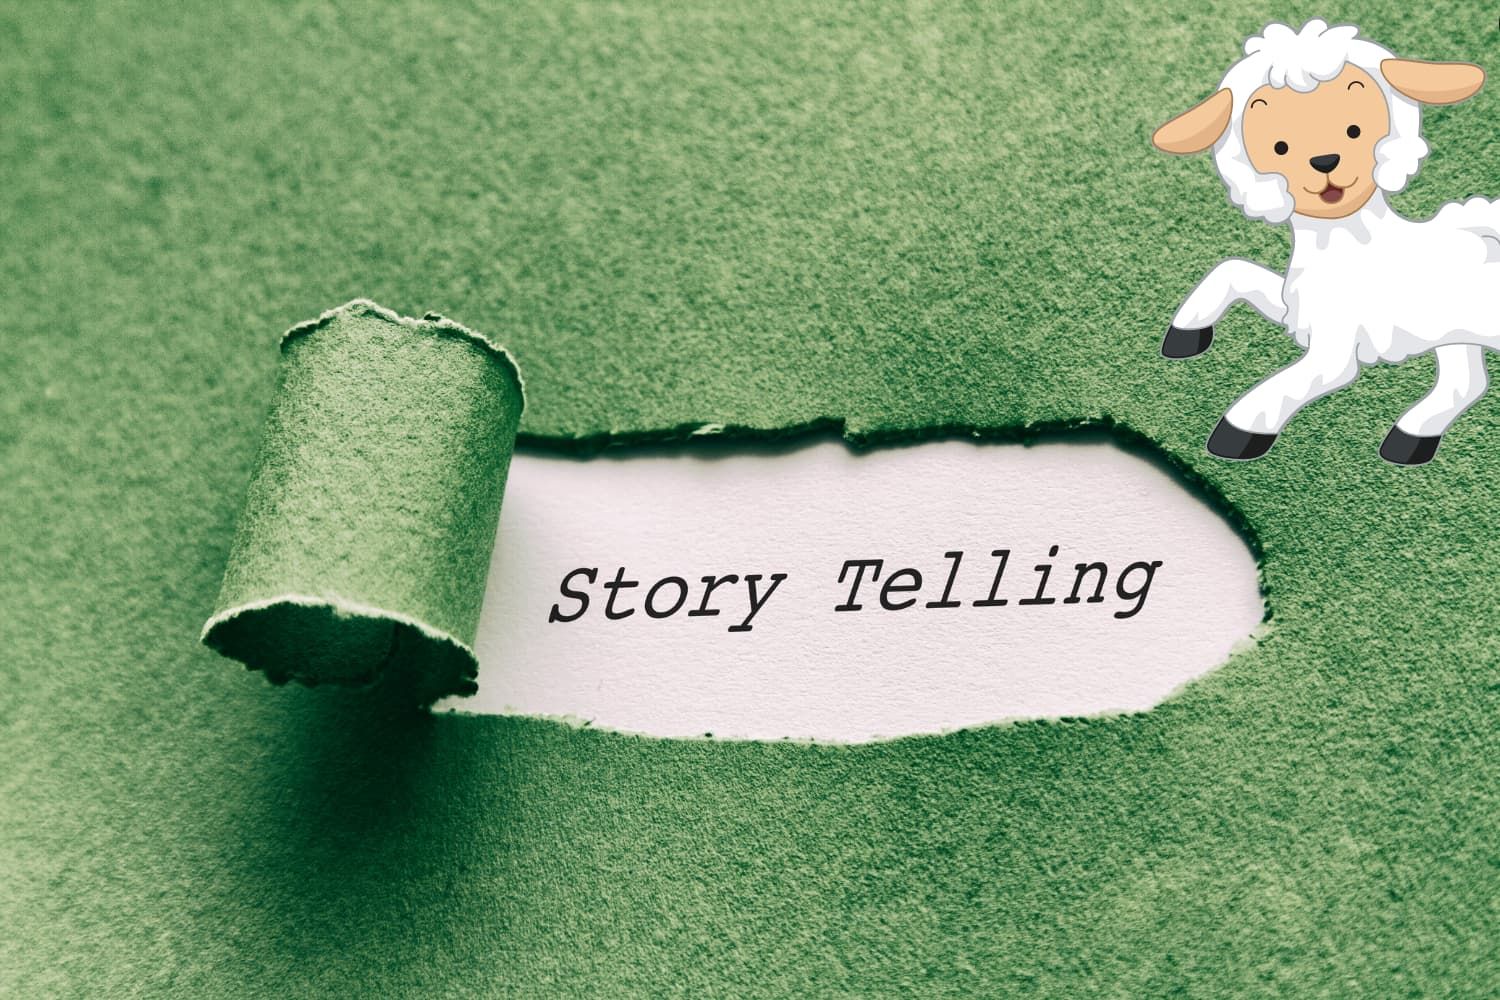 Storytelling%20tips%20-%20NT%20Parable%20of%20the%20lost%20sheep%20-%20Four%20tips%20to%20help%20you%20tell%20the%20story-0b70d295 Luke